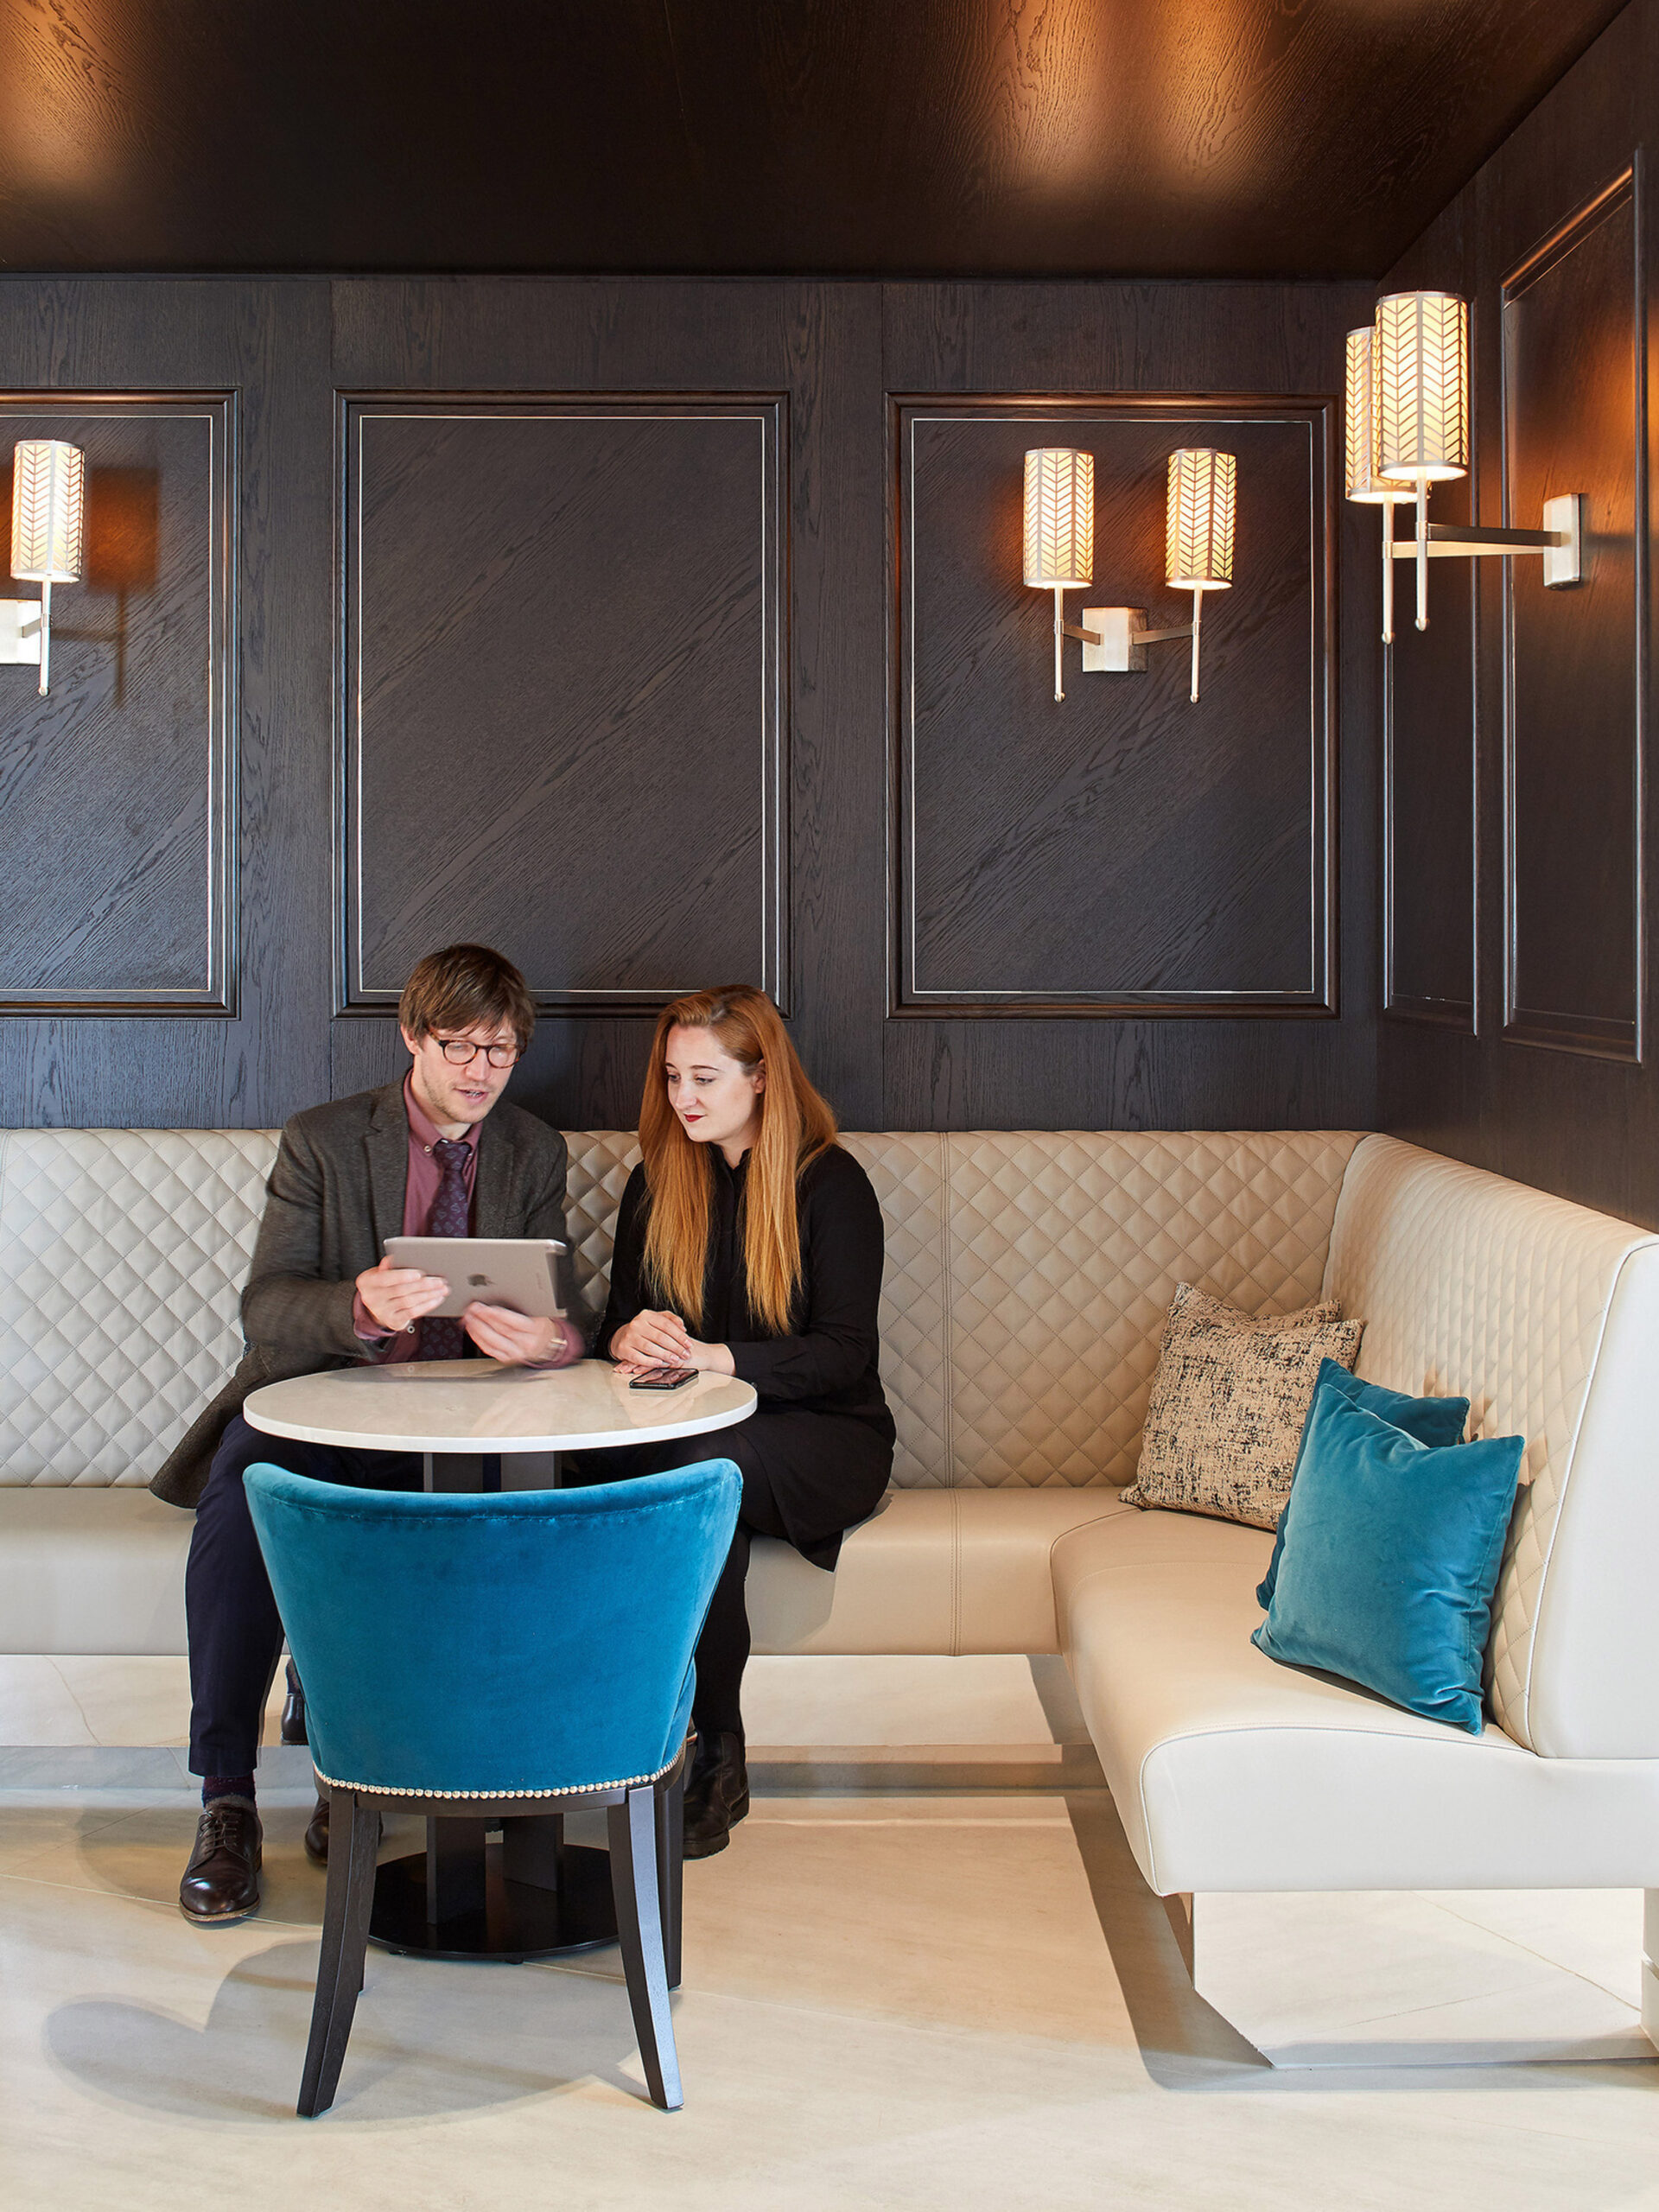 Two professionals confer in an elegantly designed meeting space with dark paneled walls and luxurious textures. A cream sofa with plush cushions, contemporary wall sconces, and a royal blue velvet chair underline the room’s sophisticated color palette and lighting strategy.